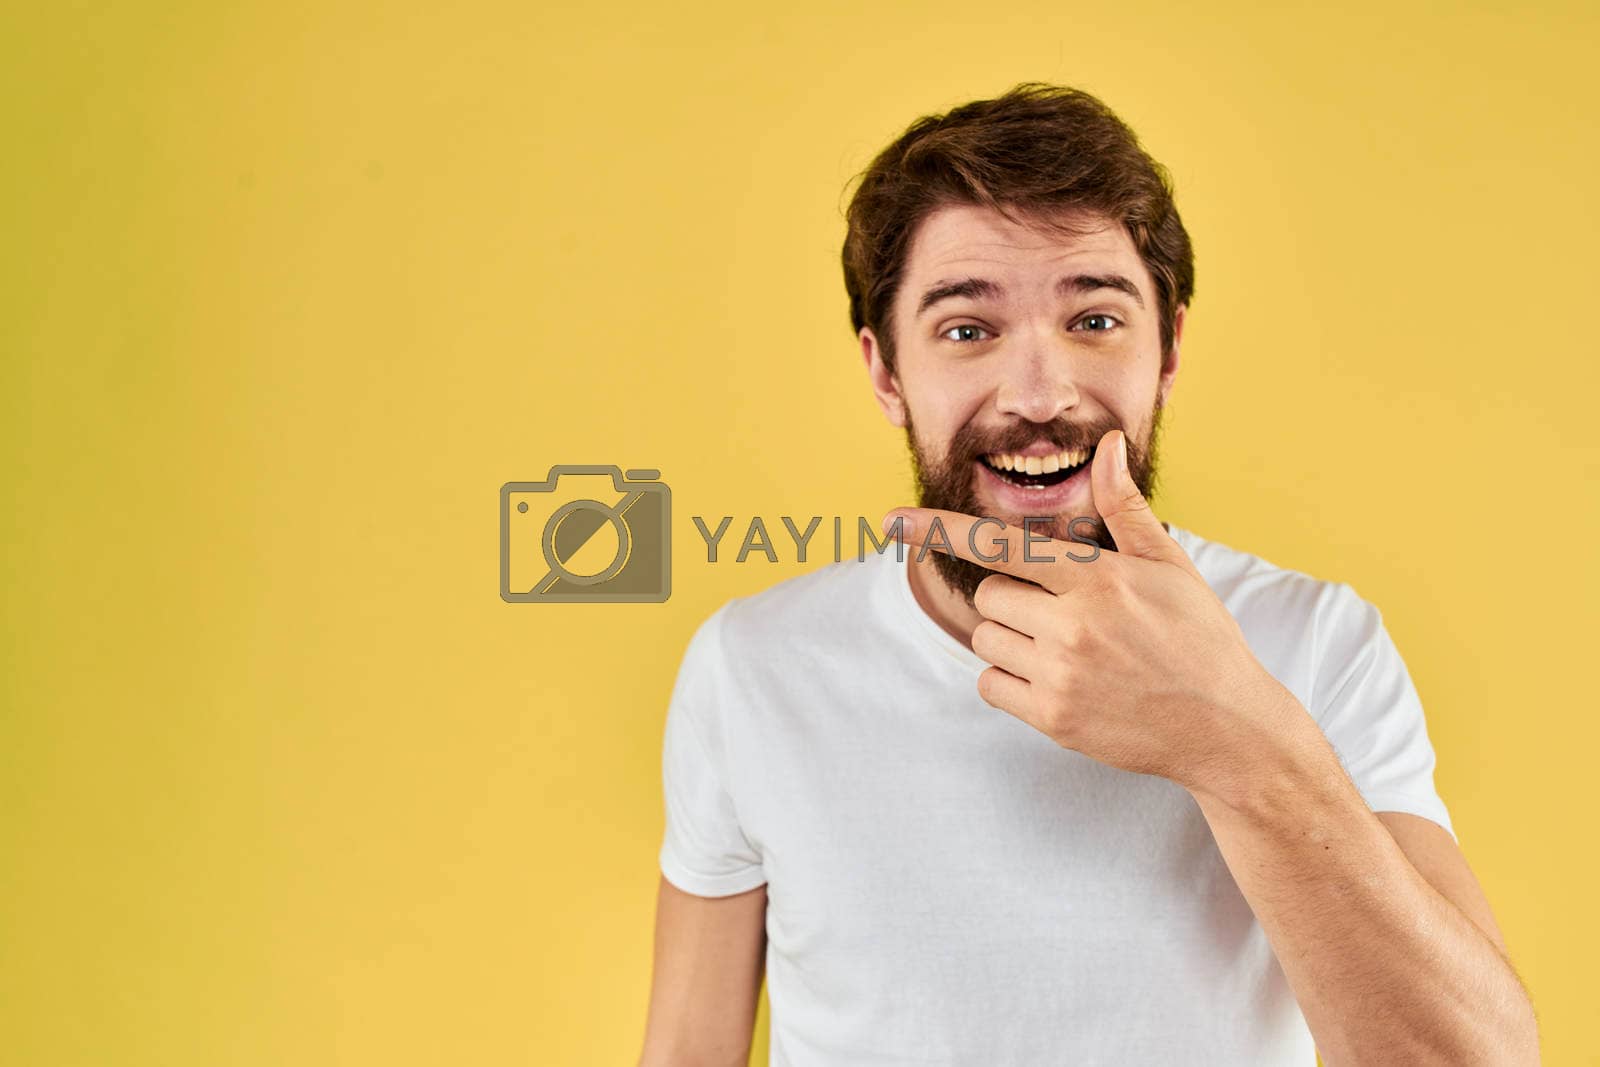 Royalty free image of Bearded man emotions fun gesture with hands white t-shirt close-up yellow background by SHOTPRIME